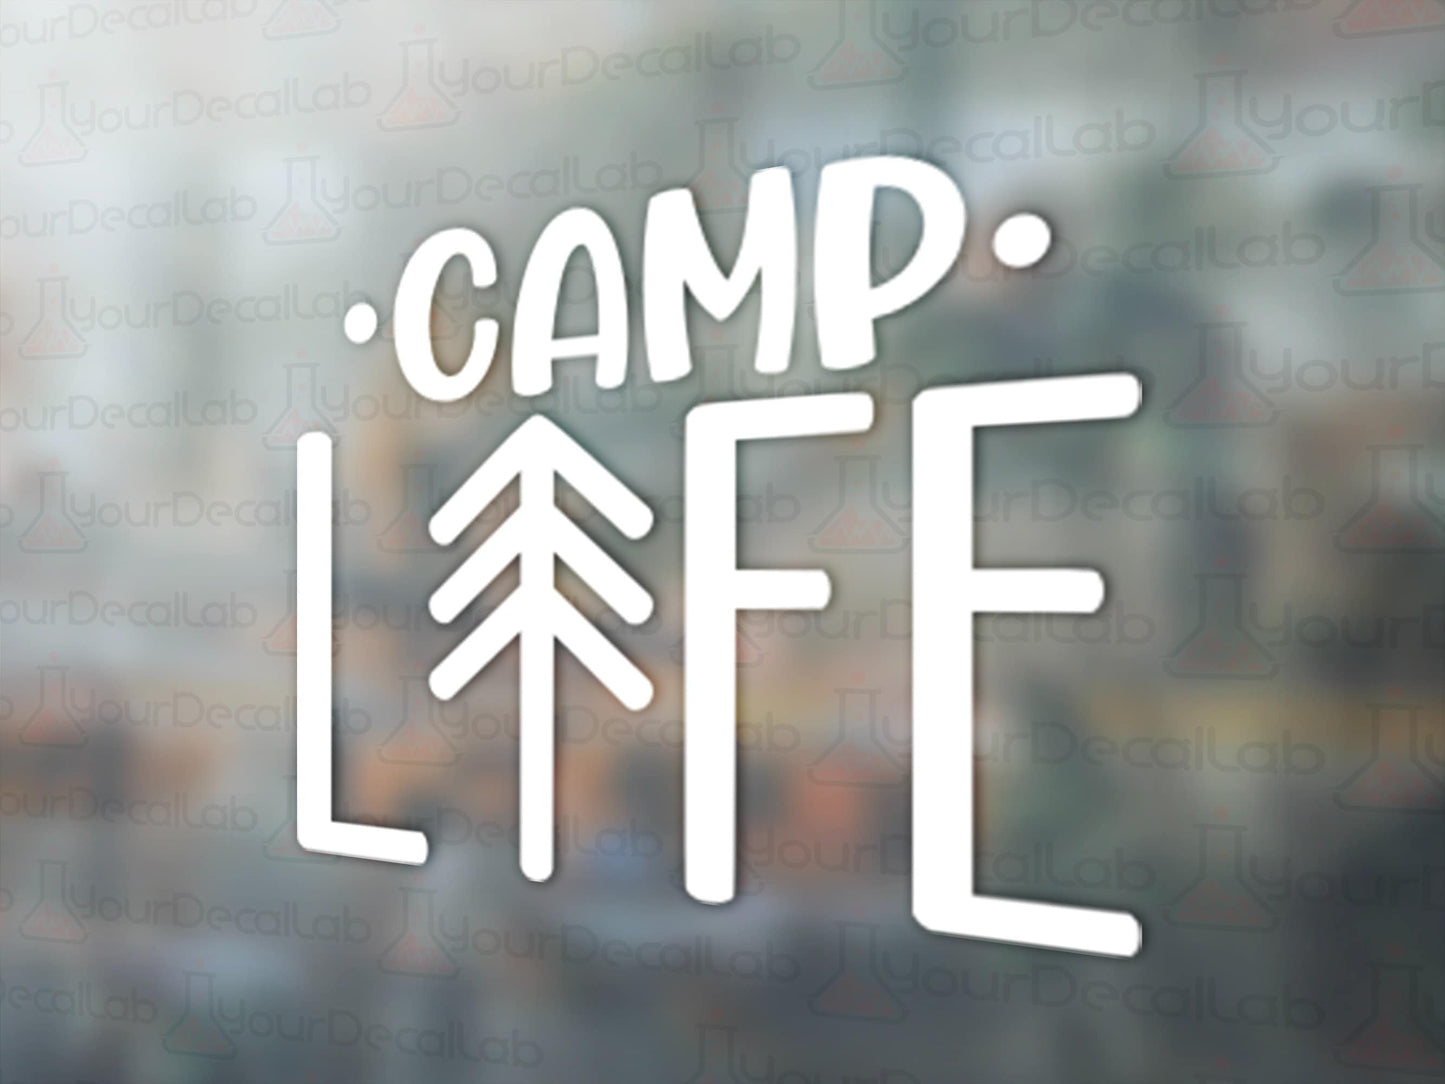 Camp Life Decal - Many Colors & Sizes